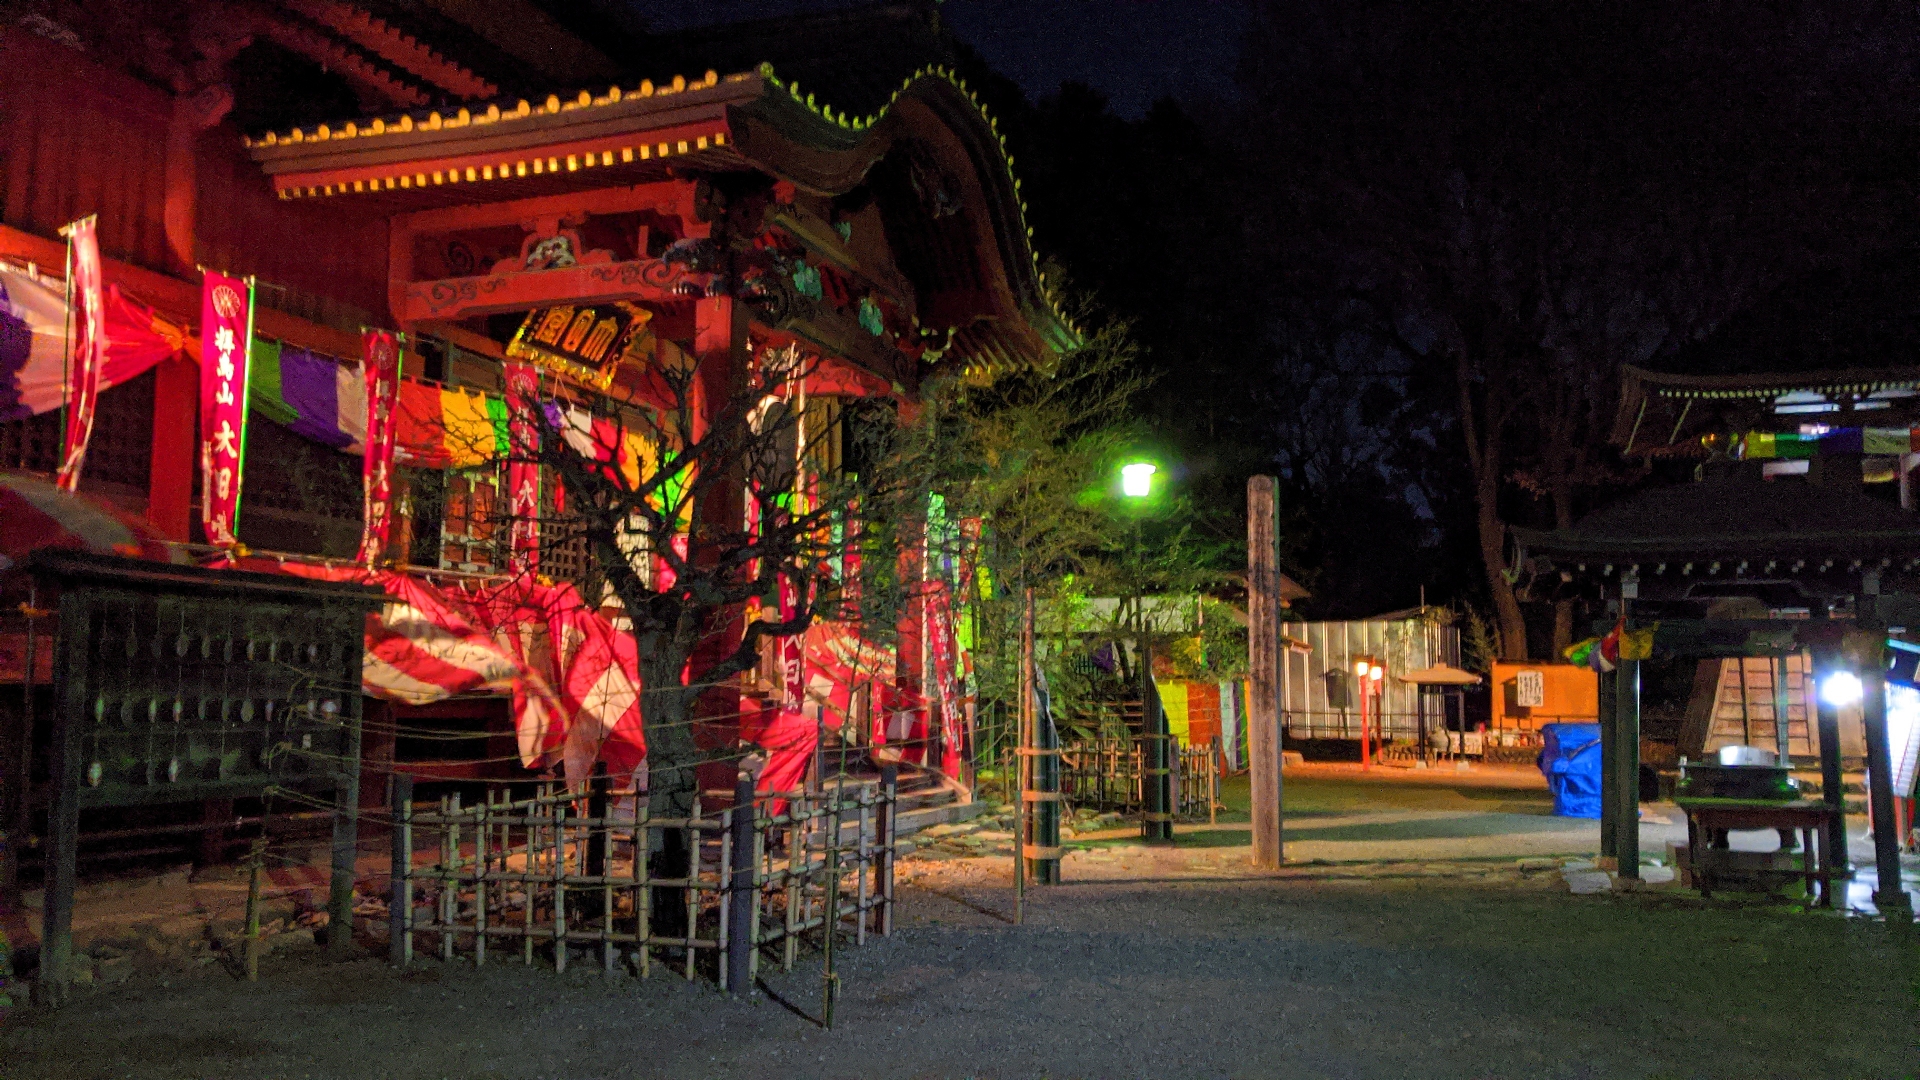 A shrine lit up at the night of new year's eve